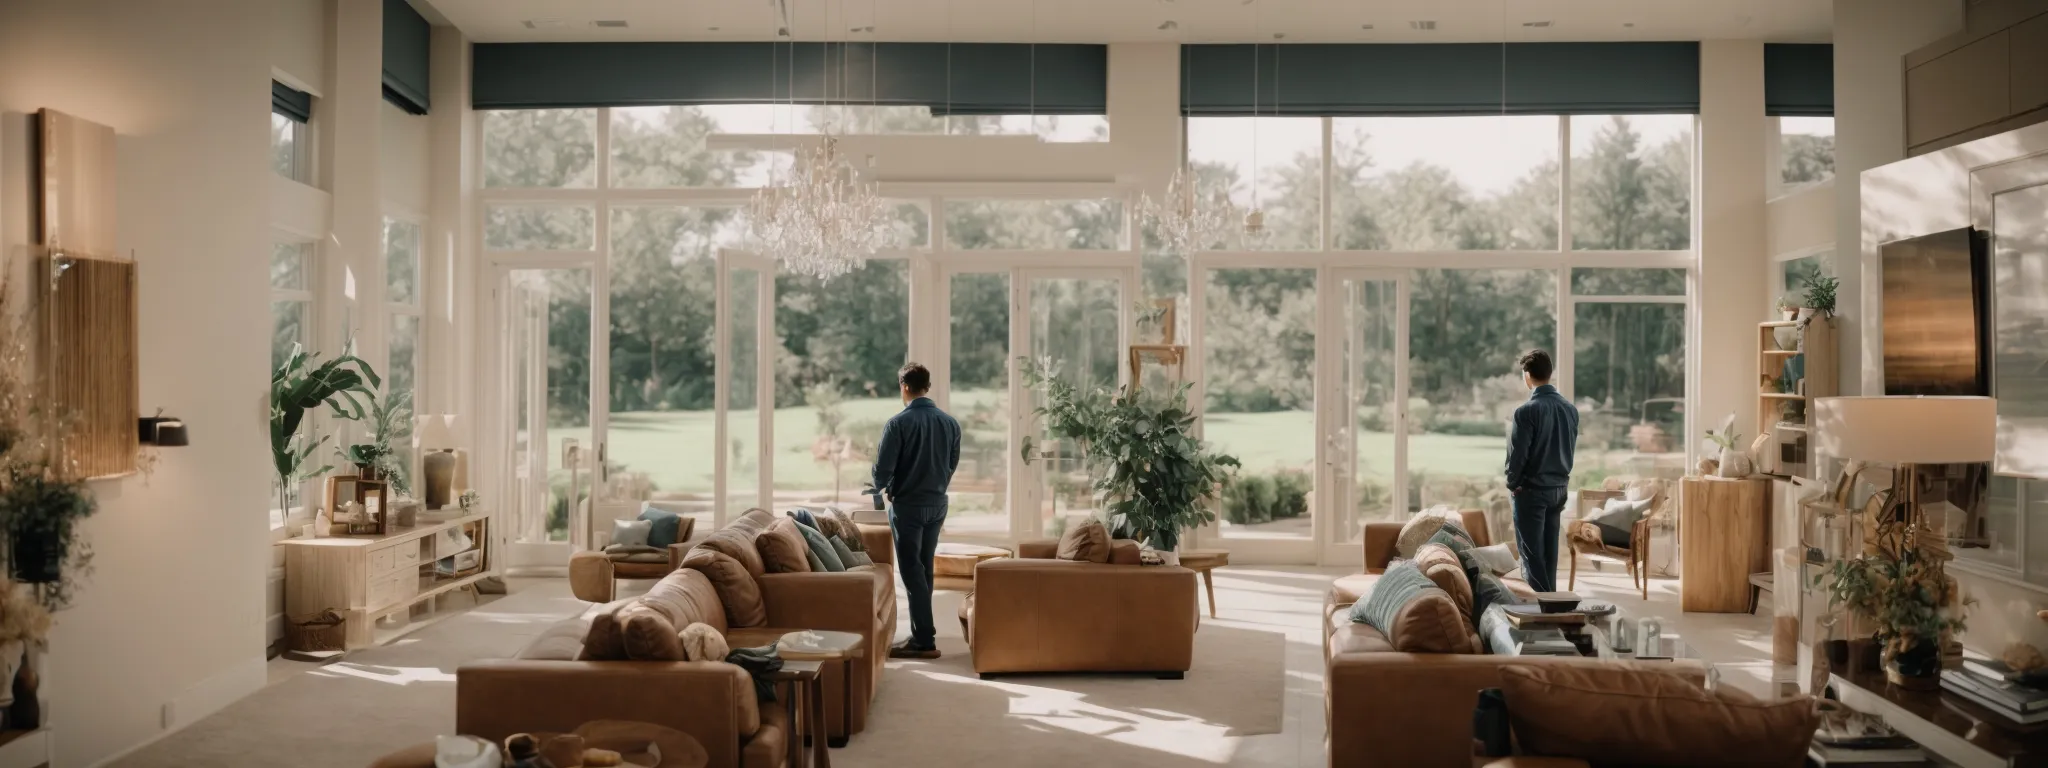 a homeowner stands before an expansive display of elegant windows and doors in a home improvement showroom, thoughtfully contemplating the selection.